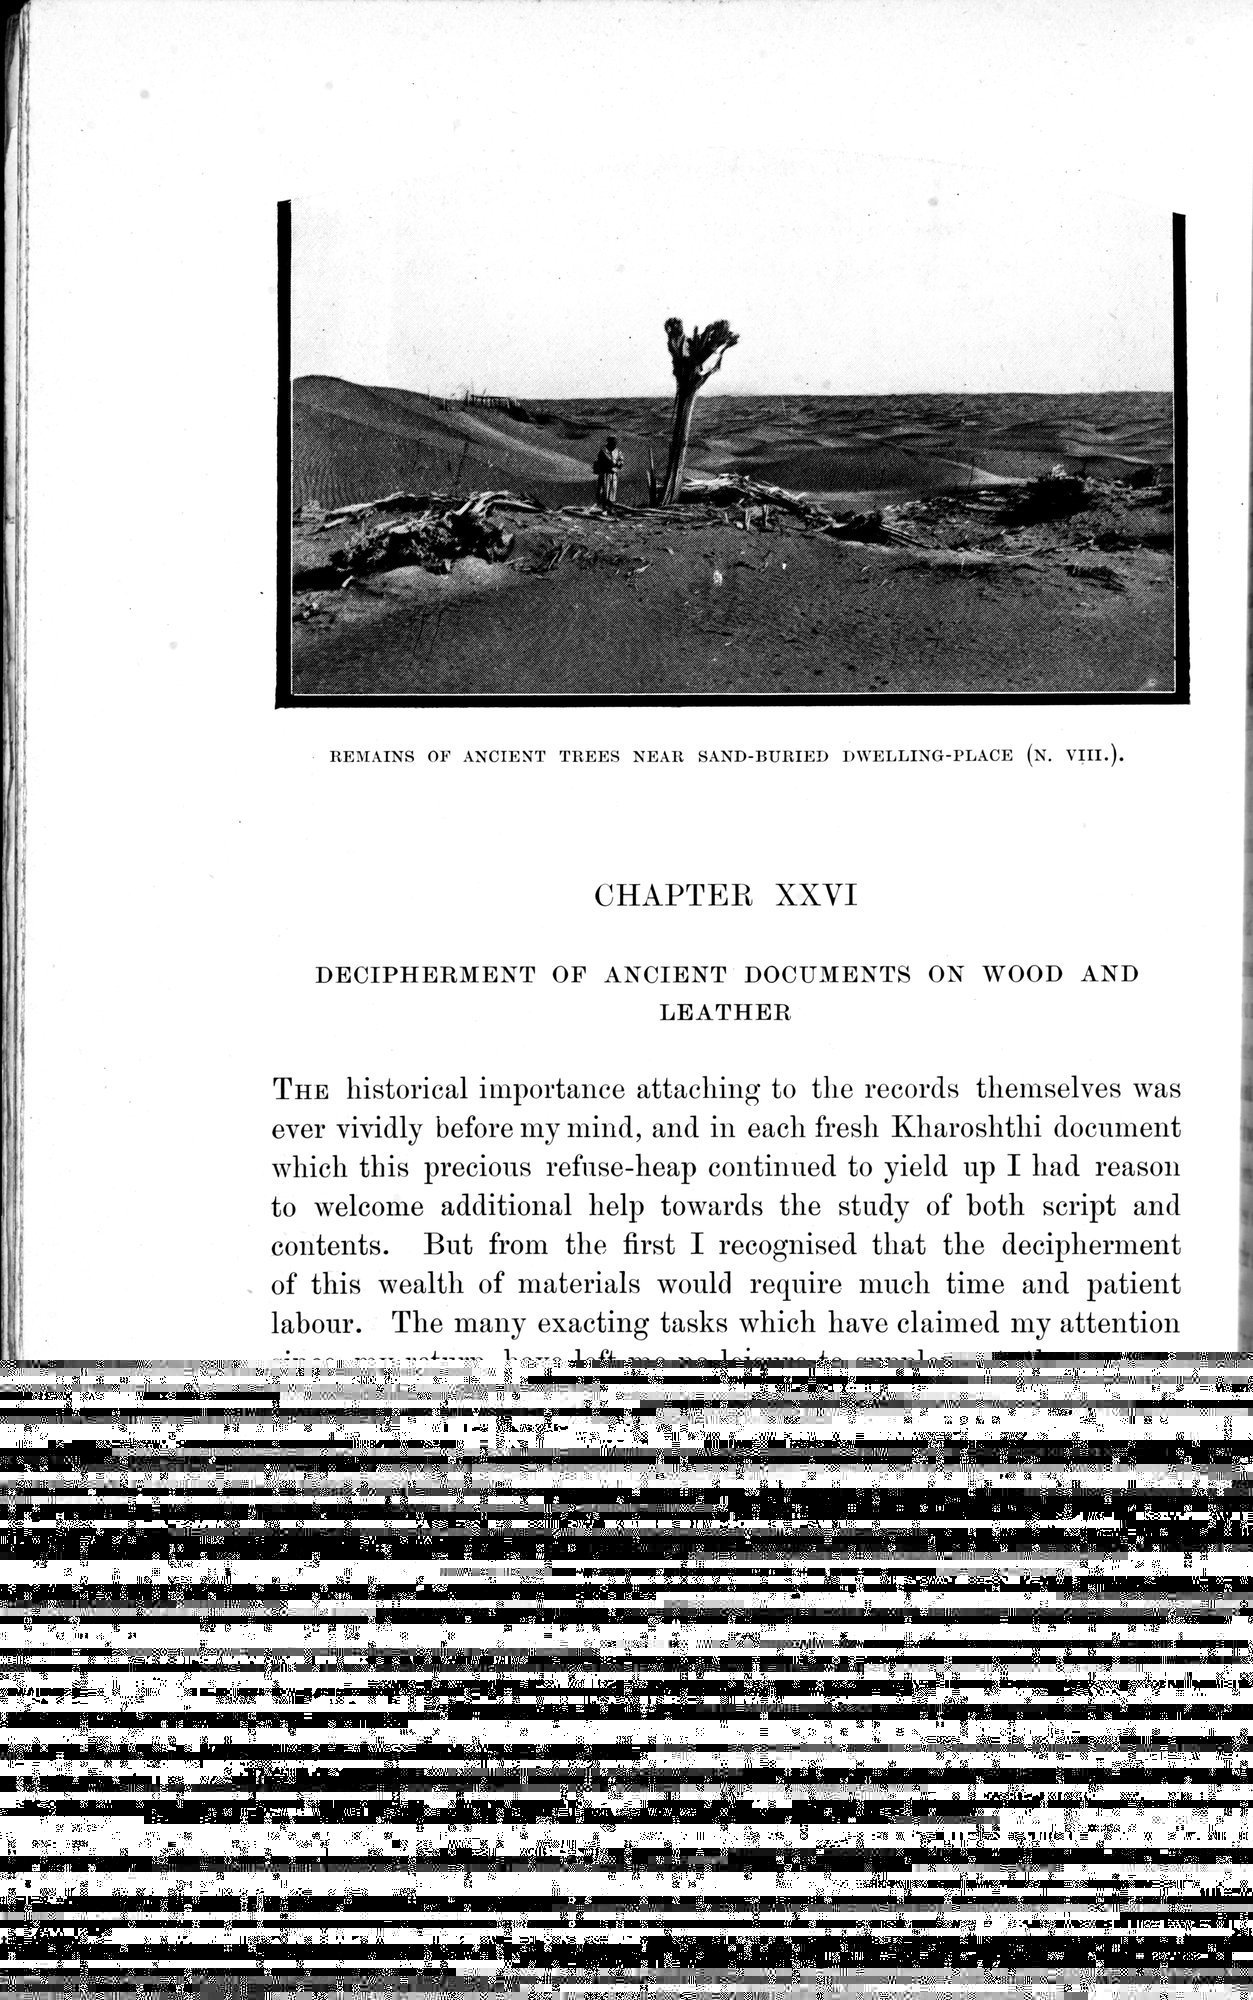 Sand-Buried Ruins of Khotan : vol.1 / Page 434 (Grayscale High Resolution Image)